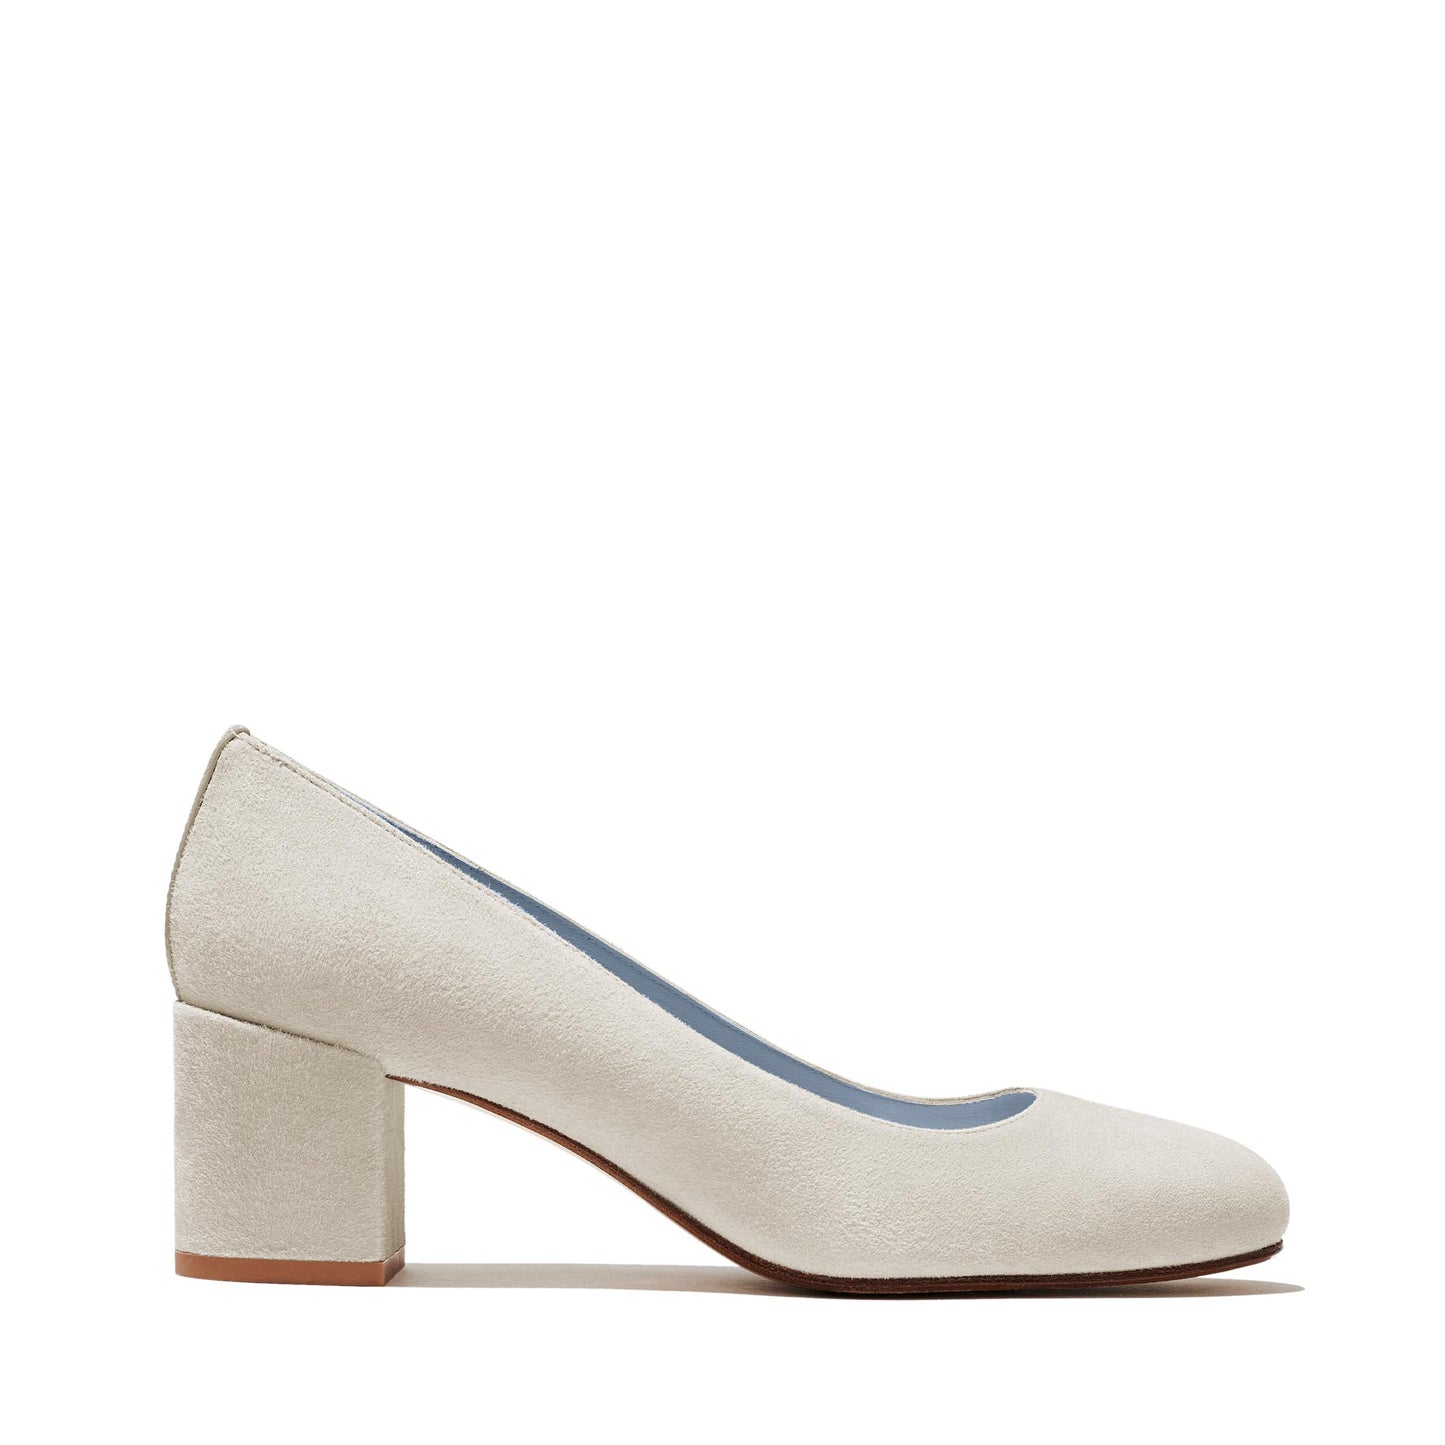 ivory - suede, blue